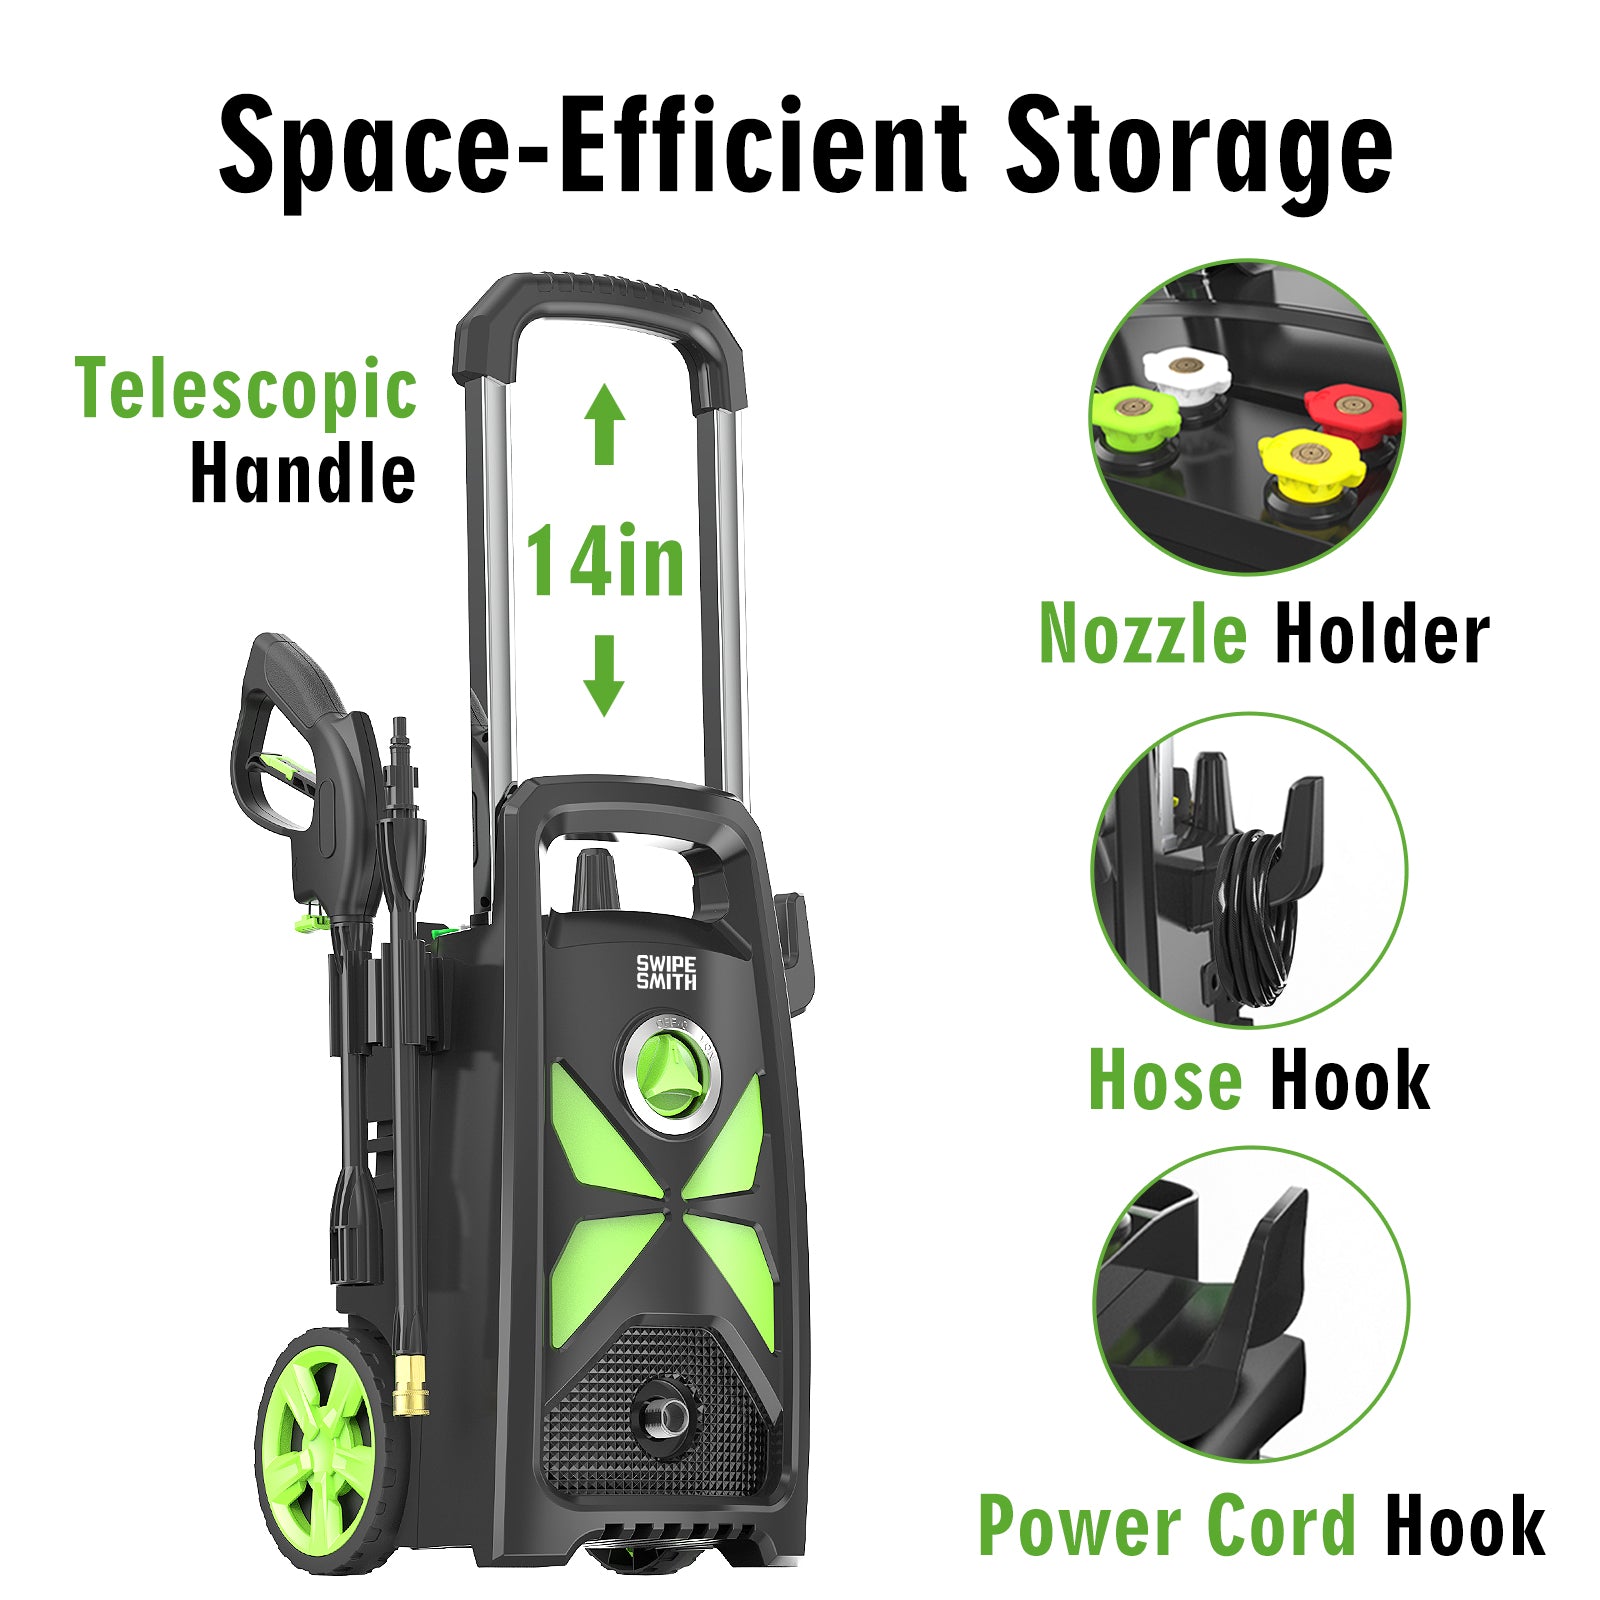 Electric Pressure Washer, SI-TH003 3000 Max PSI, 2.4 GPM Power Washer with Telescopic Handle and Versatile Cleaning Accessories